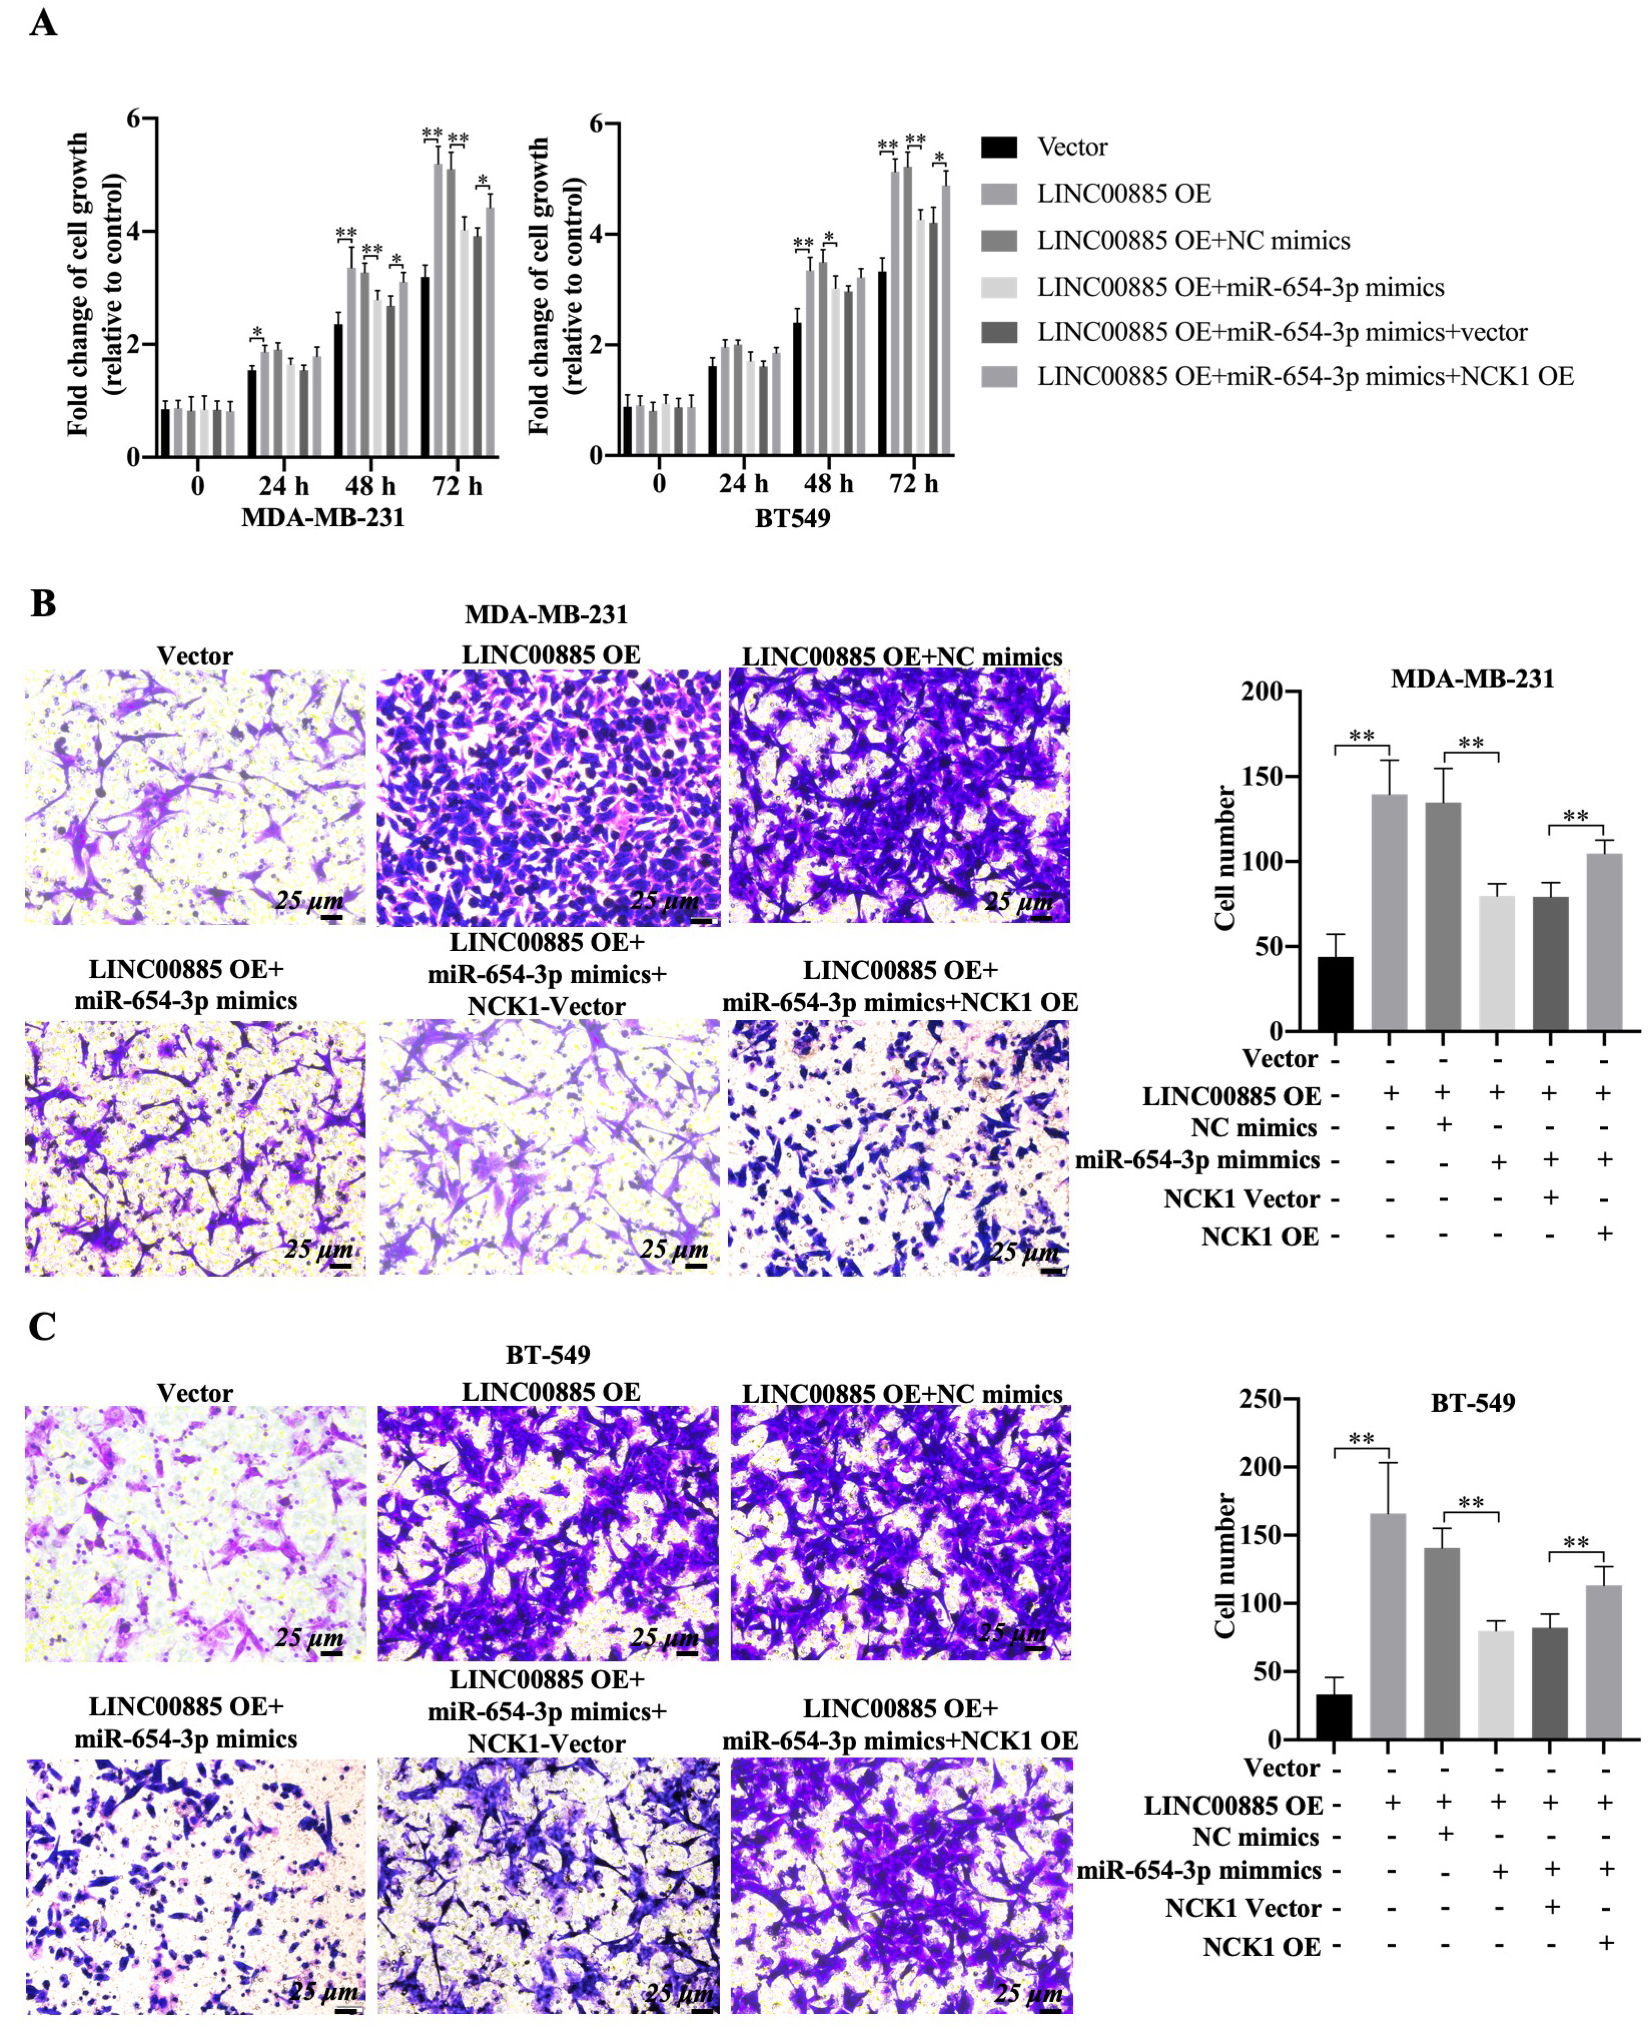 Effect of LINC00885/miR-654-3p/NCK1 pathway on the migration of triple-negative breast cancer cells. MDA-MB-231 and BT549 cells were transfected with pcDNA3.1-LINC00885, pcDNA3.1-LINC00885 + NC-shRNA, pcDNA3.1-LINC00885 + mir-654-3p mimic and pcDNA3.1-LINC00885 + mir-654-3p mimic + pcDNA3.1-NCK1. (A) Reverse transcription-quantitative PCR was used to observe the growth of MDA-MB-231 and BT549 cells. Migration of (B) MDA-MB-231 and (C) BT549 cells was measured using the Transwell assay. The relative quantitation of the transferred cells is illustrated in the right panel (scale bar, 25 μm). * P< 0.05 and ** P< 0.01. NCK1, noncatalytic region of tyrosine kinase 1; WT, wild type; MUT, mutation; R, Pearson’s coefficient; NC, negative control; pcDNA3.1, plasmid NC; si-RNA, small interfering RNA; pcDNA3.1-LINC00885, LINC00885-overexpression plasmid; siRNA-LINC00885, siRNA targeting LINC00885; anti-miR, miR inhibitor; pcDNA3.1-NCK1; NCK1-overexpression plasmid.